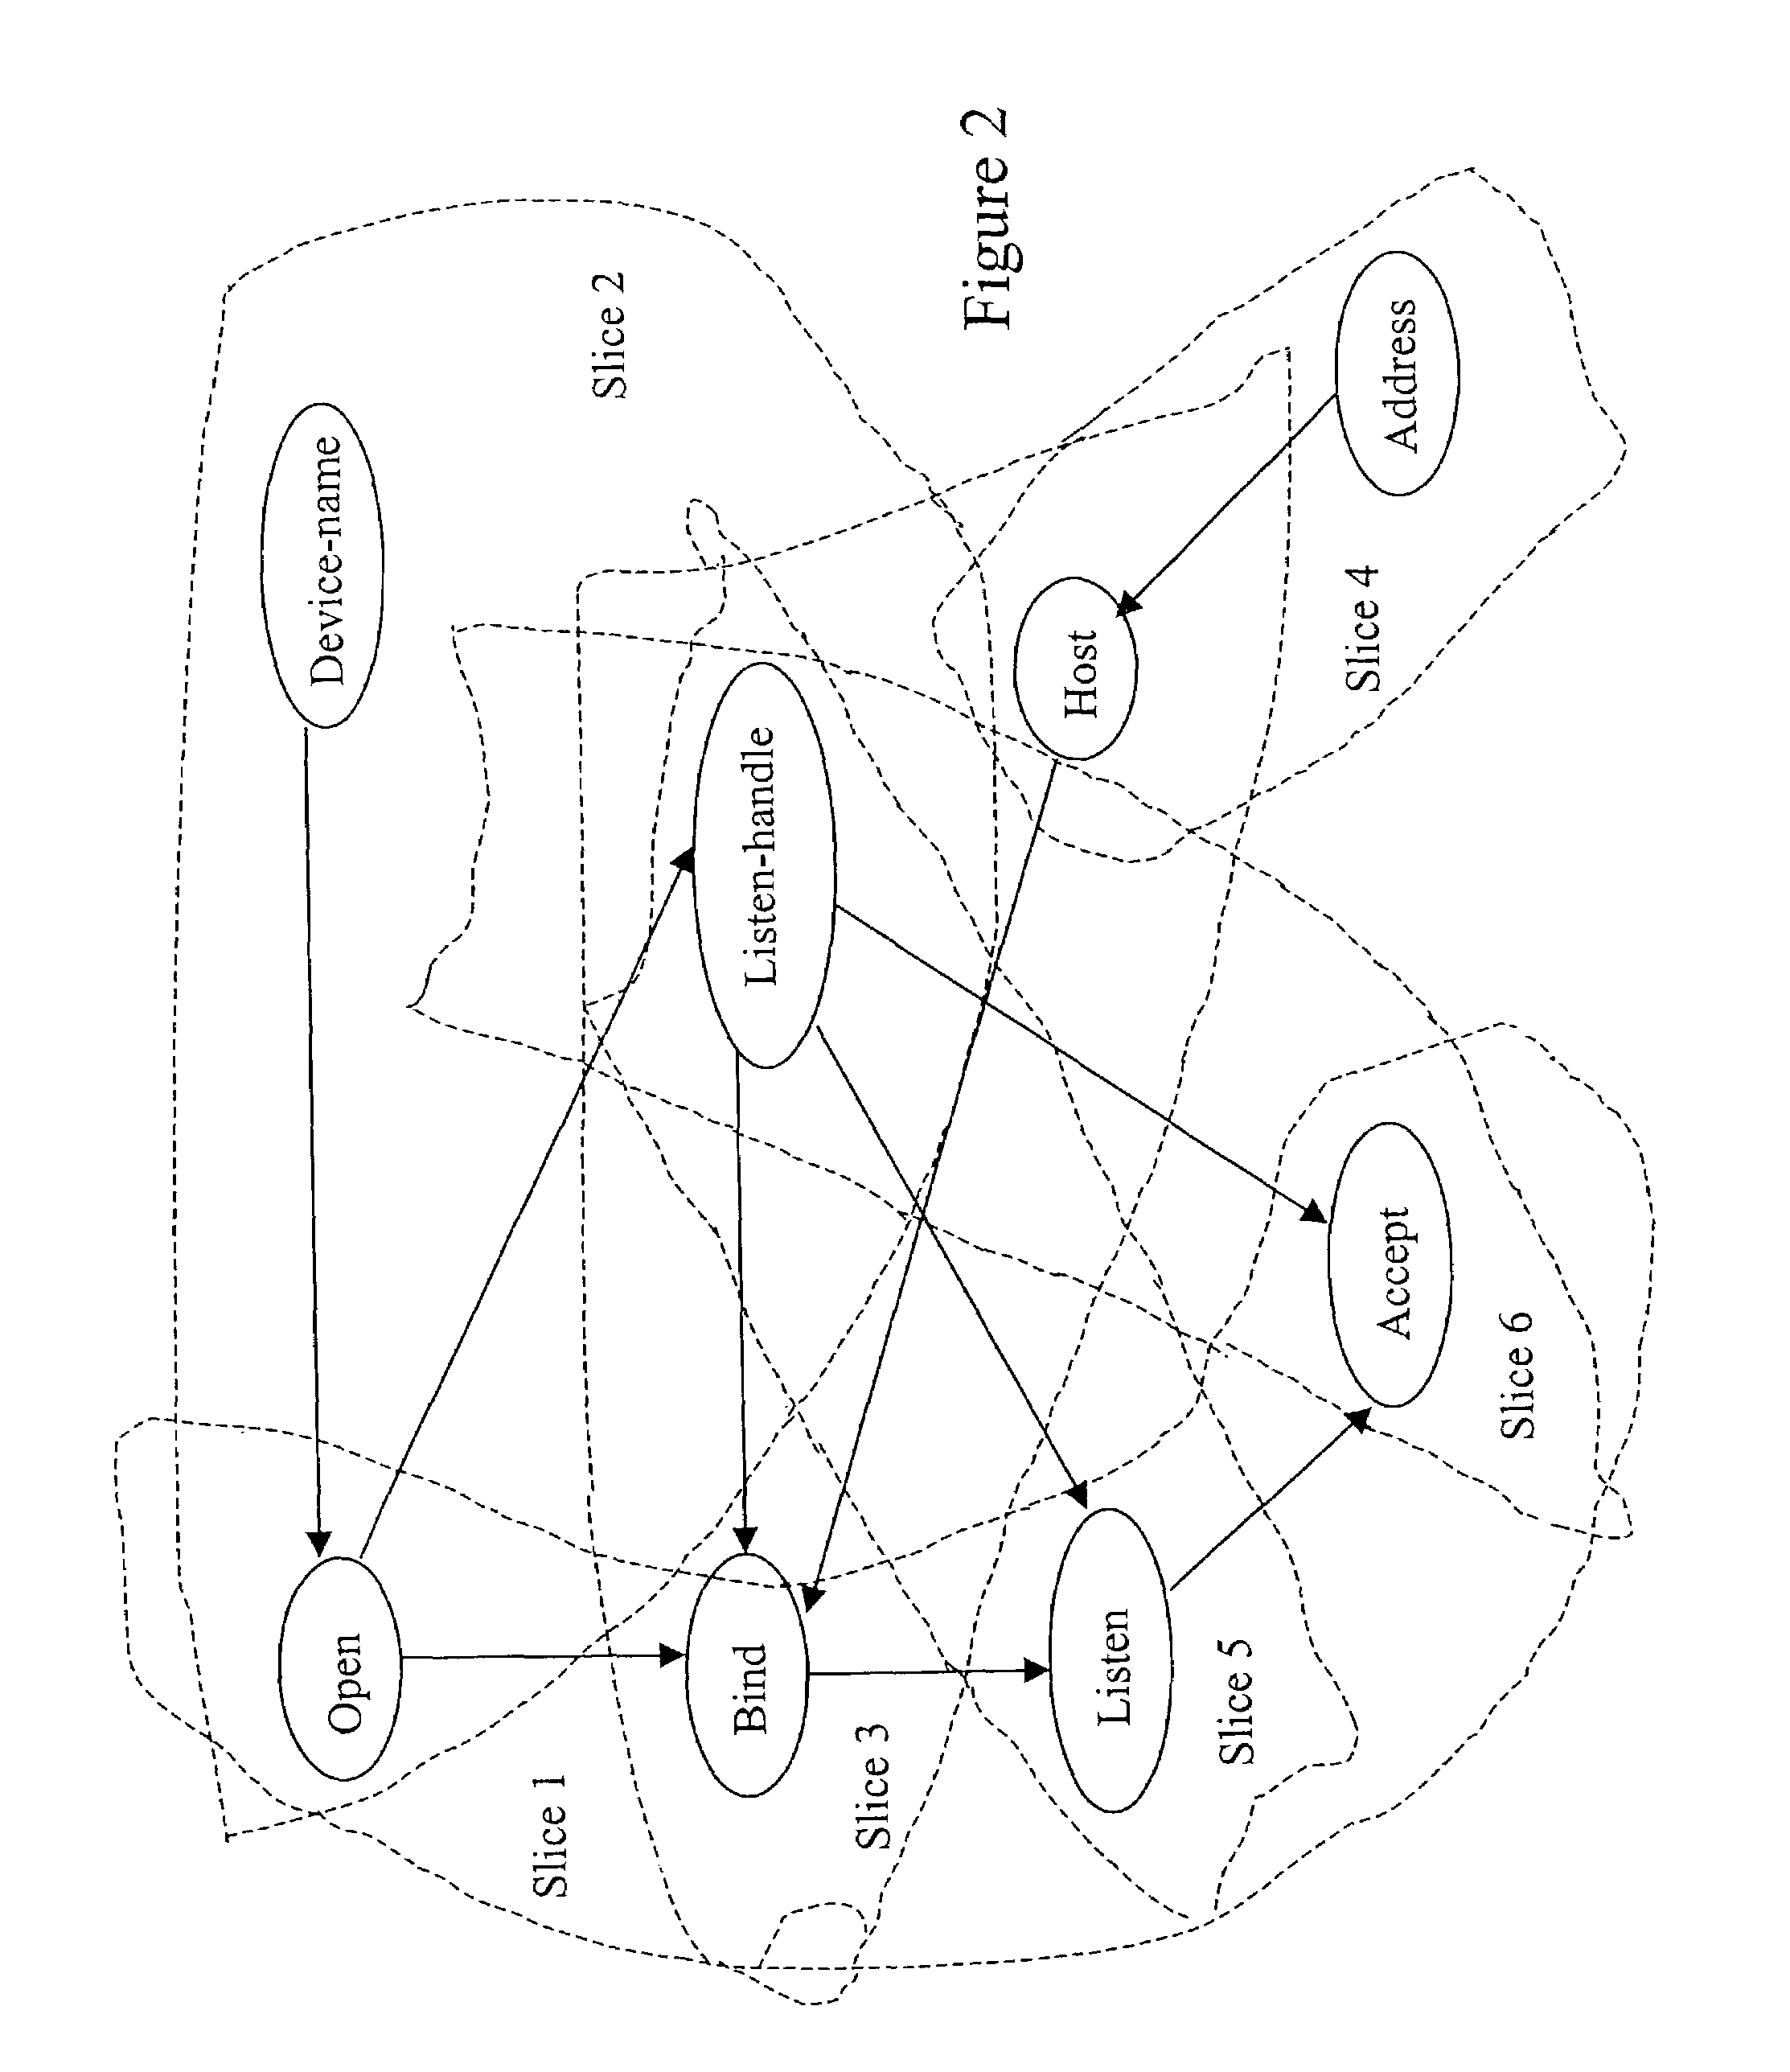 Method and apparatus for extracting knowledge from software code or other structured data